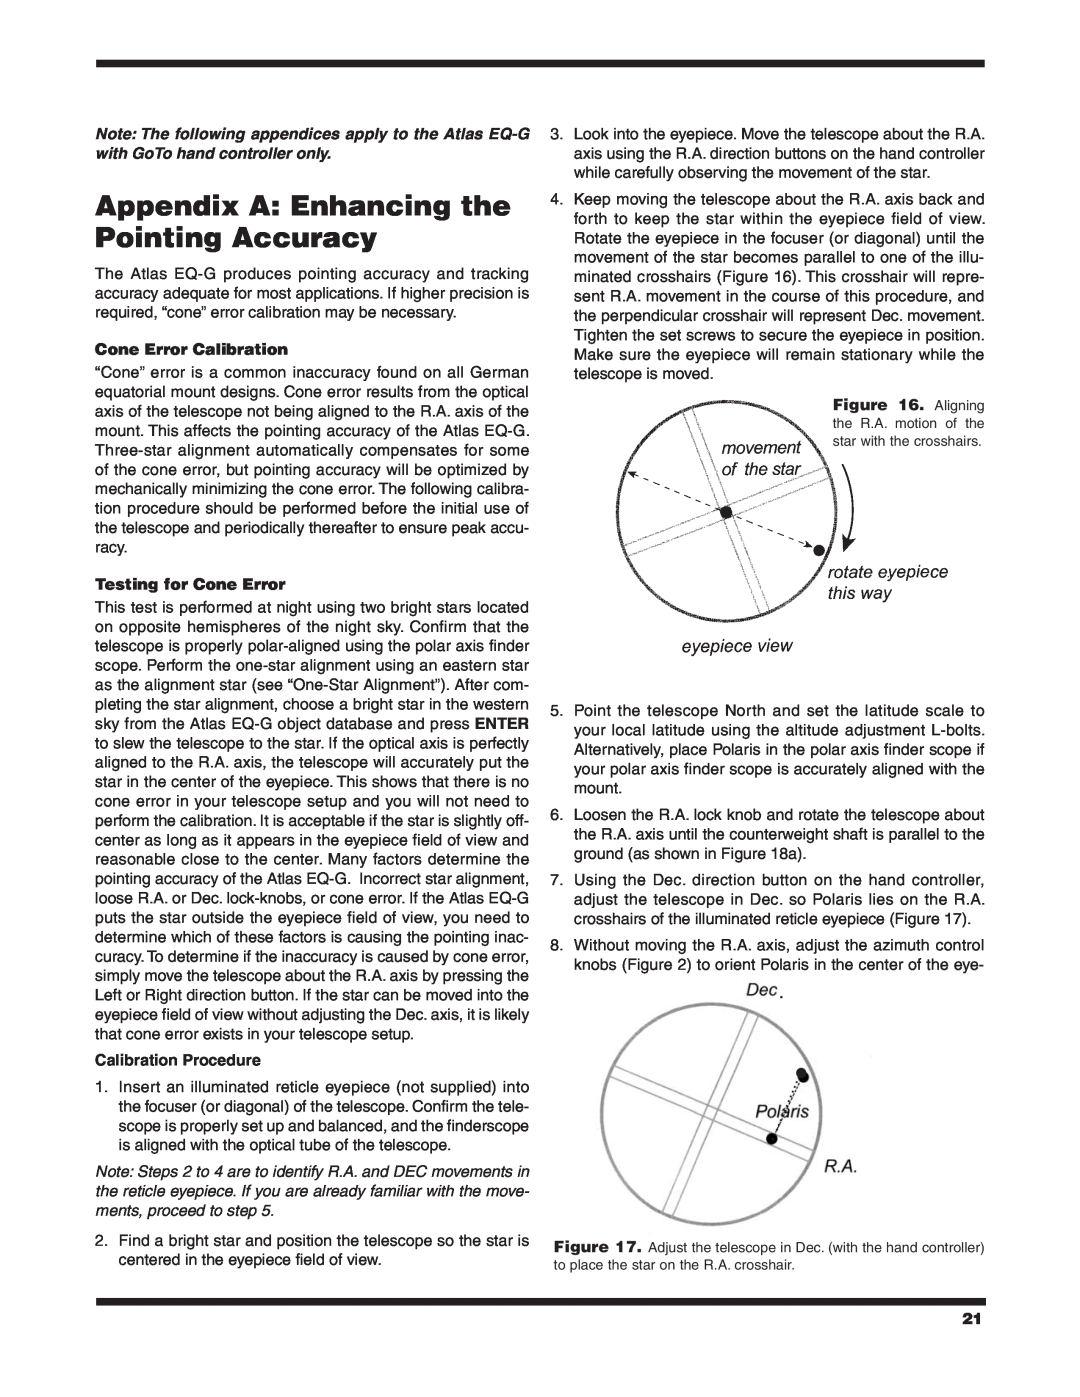 Orion EQ-G instruction manual Appendix A Enhancing the Pointing Accuracy, Cone Error Calibration, Testing for Cone Error 